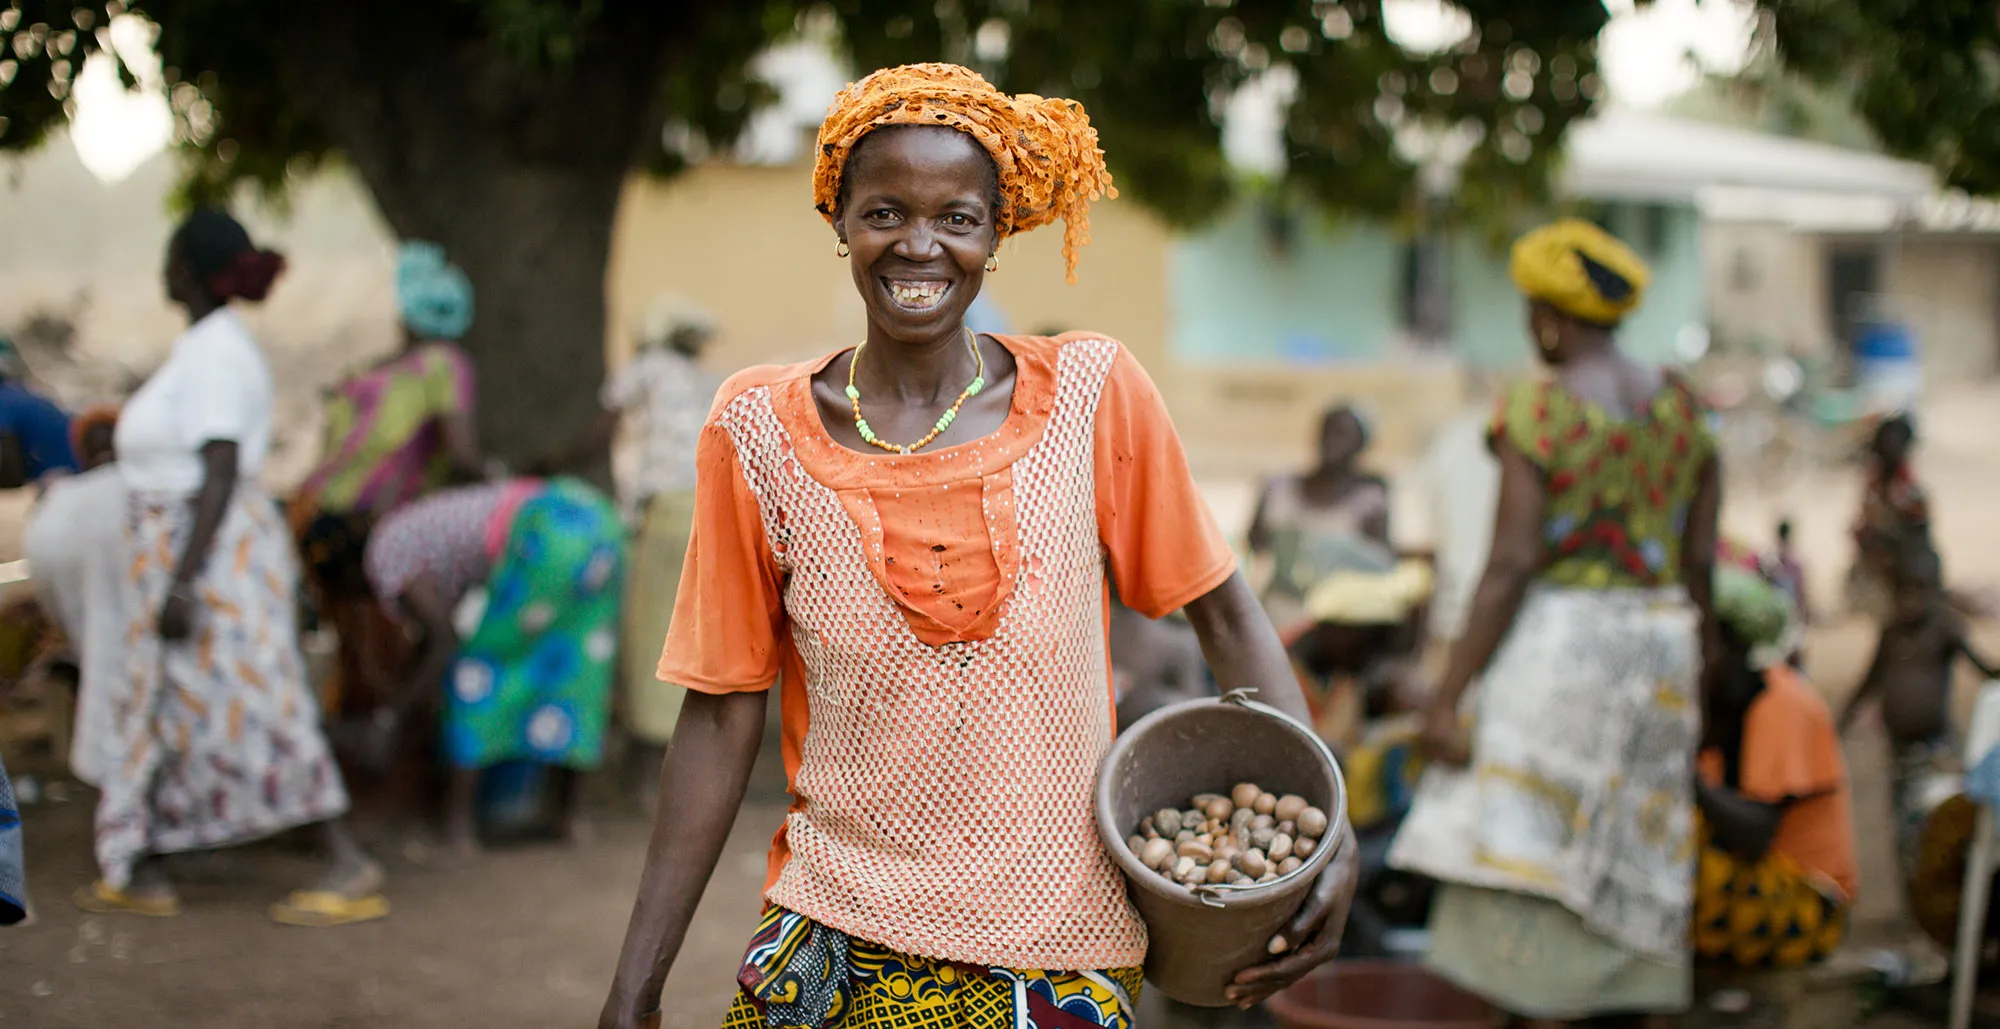 A woman holding a bucket smiles.